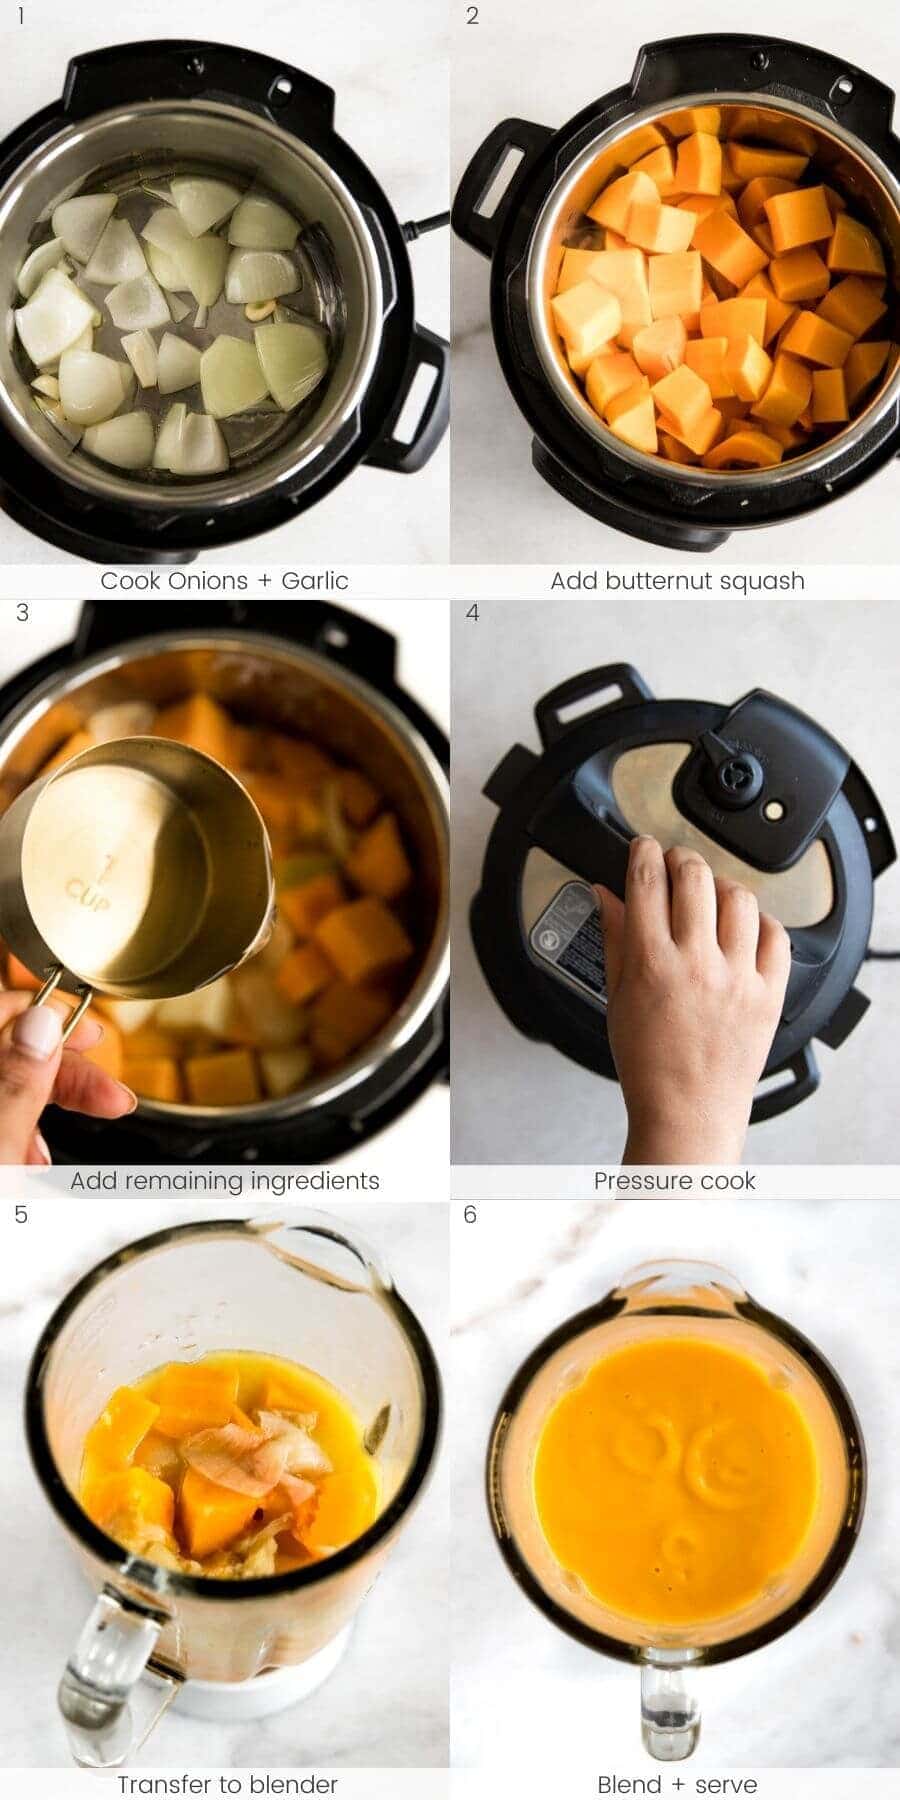 Step by step instructions for making butternut squash soup in the pressure cooker